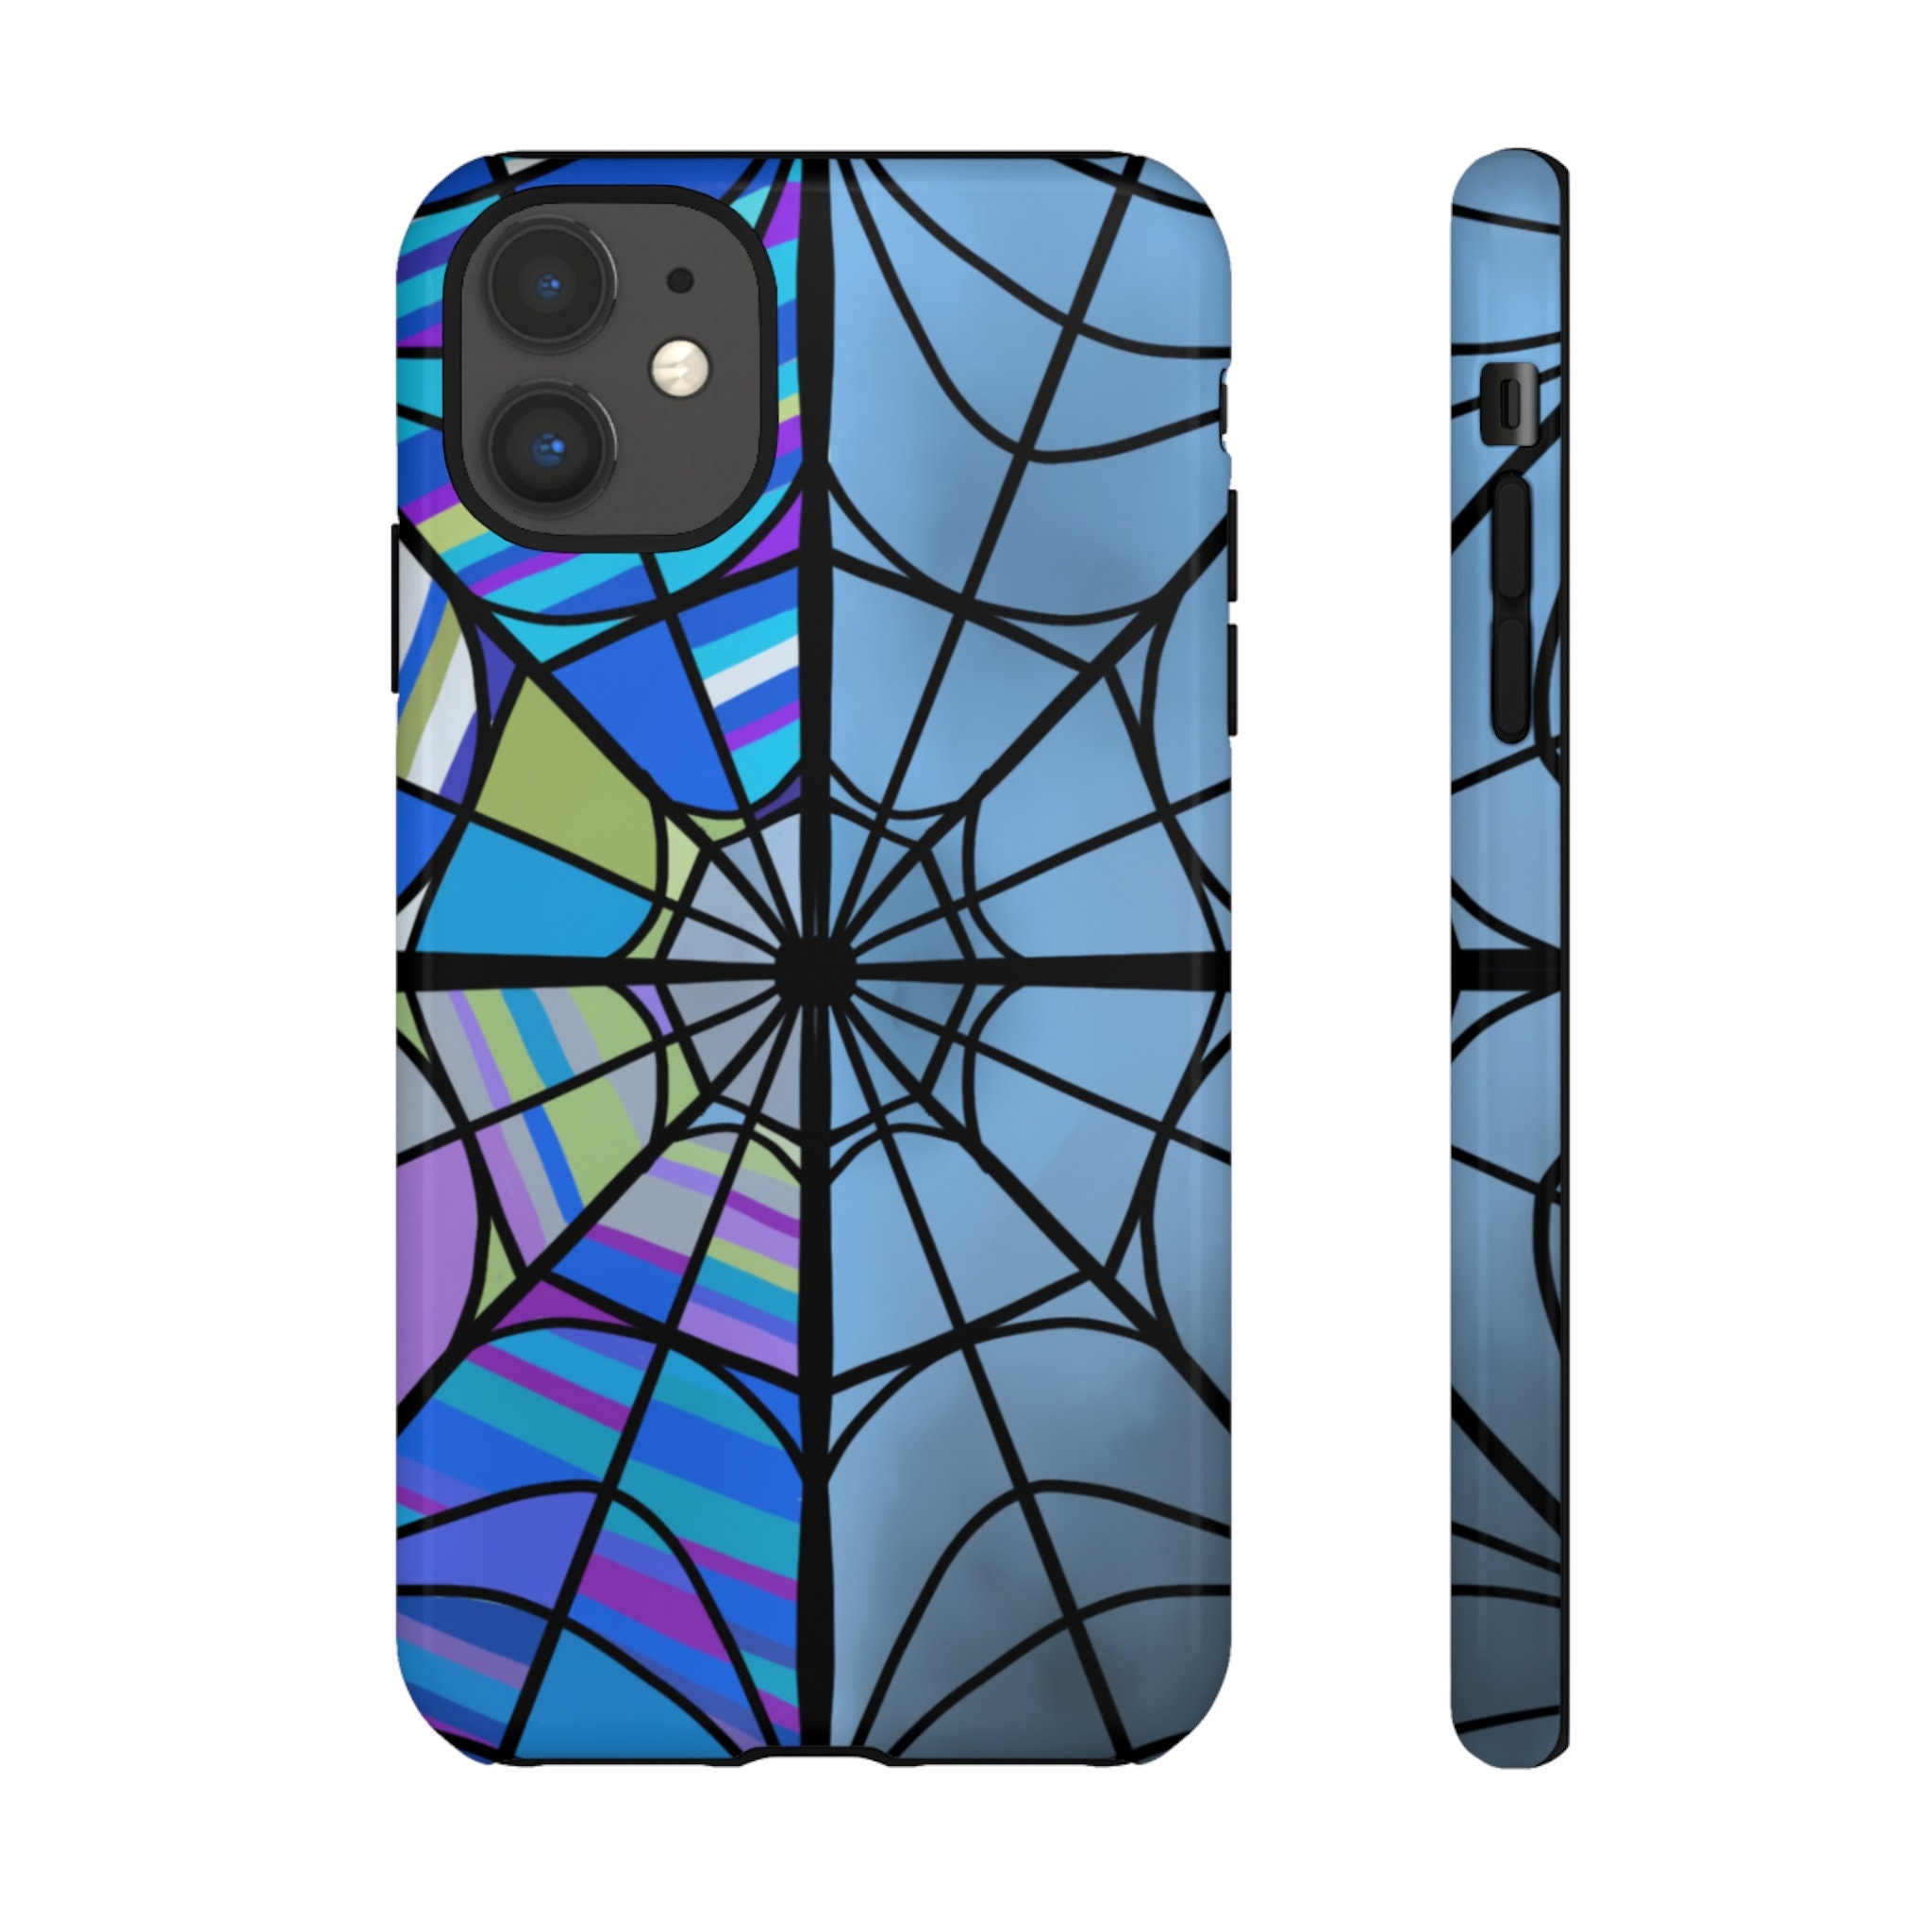 Discover Wednesday Stained Glass iPhone Case